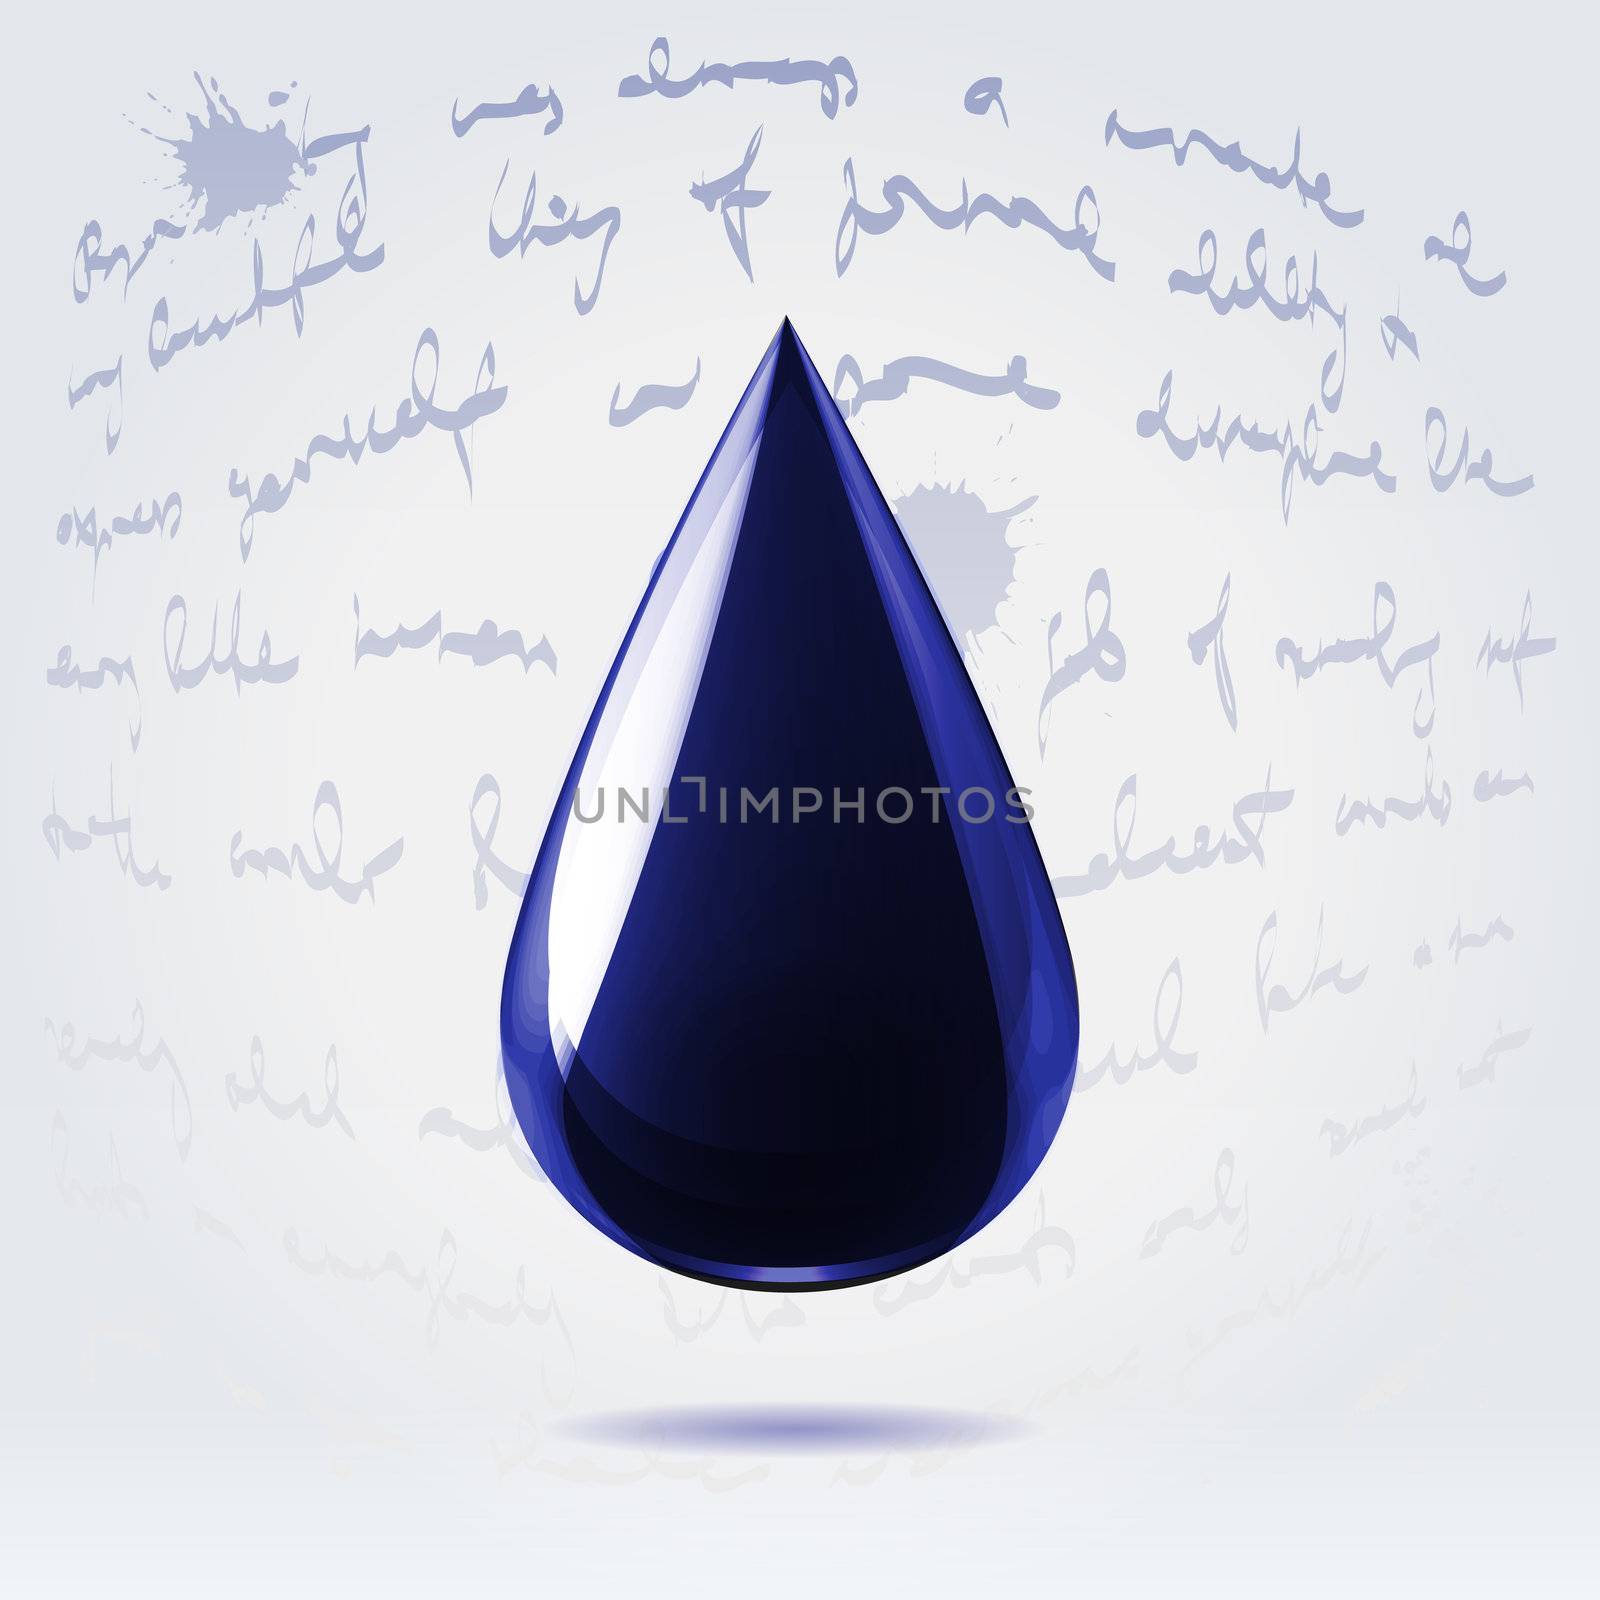 Glossy dark bright blue glossy ink drop on a light neutral background handwritten text with splashes.